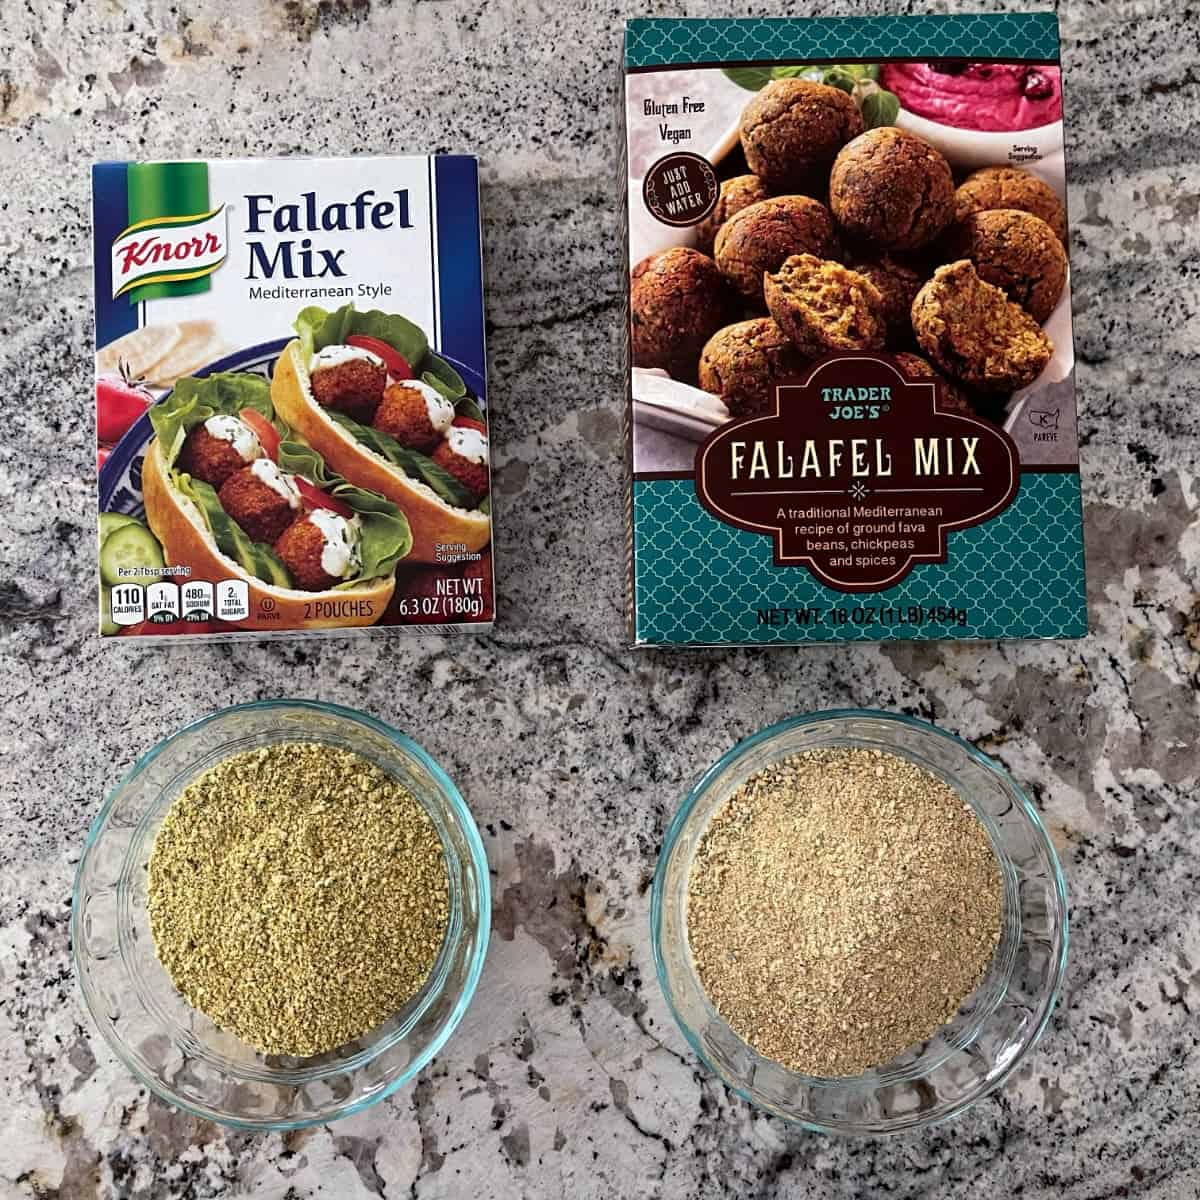 Knorr falafel mix package near a small glass bowl filled with mix right next to package of Trader Joe's falafel mix package near small bowl of mix, for comparison.